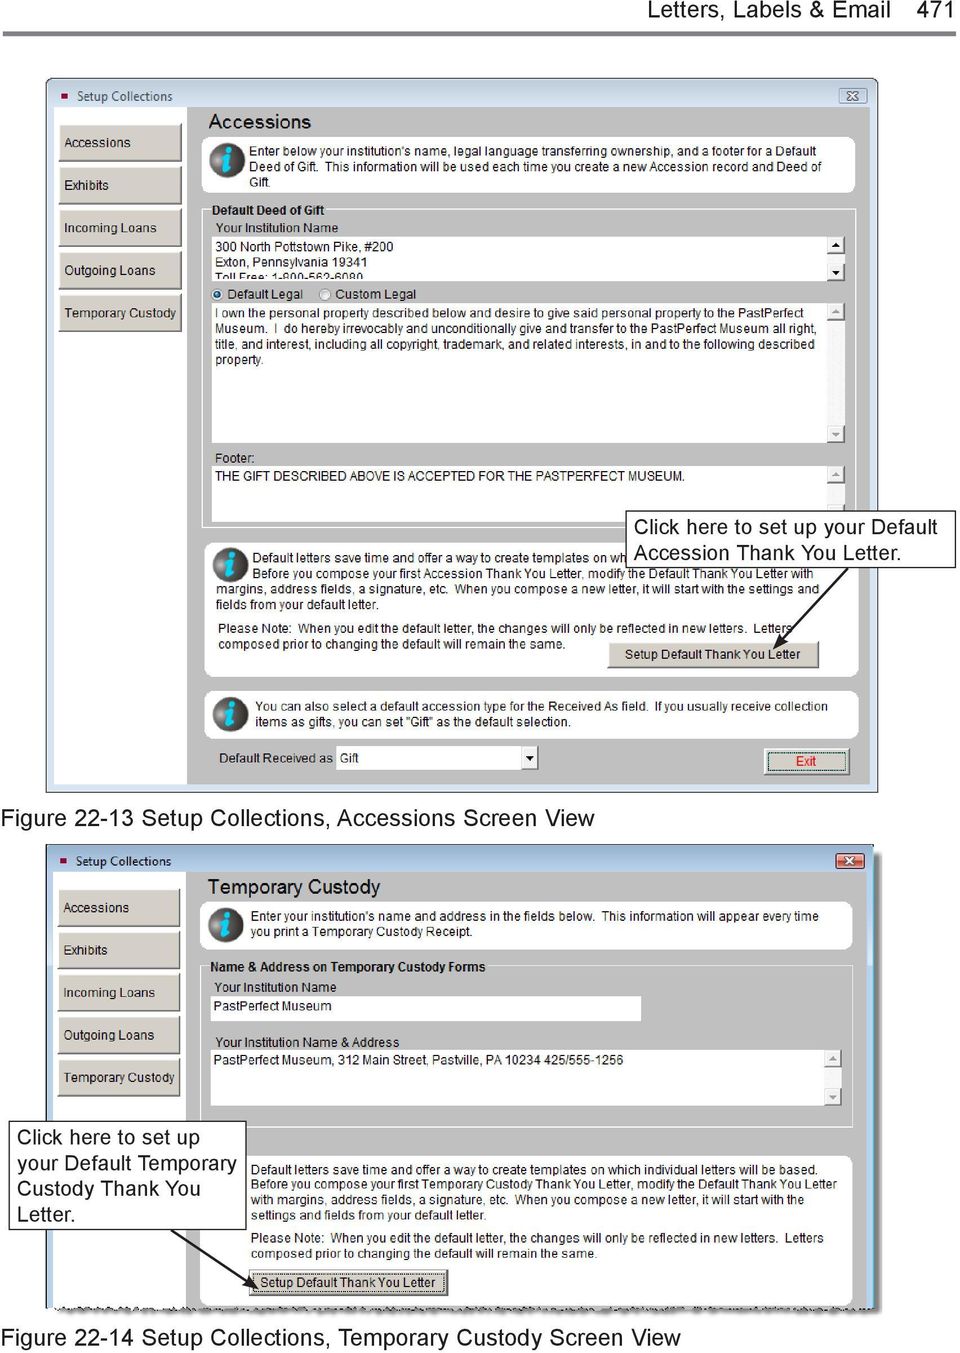 Figure 22-13 Setup Collections, Accessions Screen View Click here to